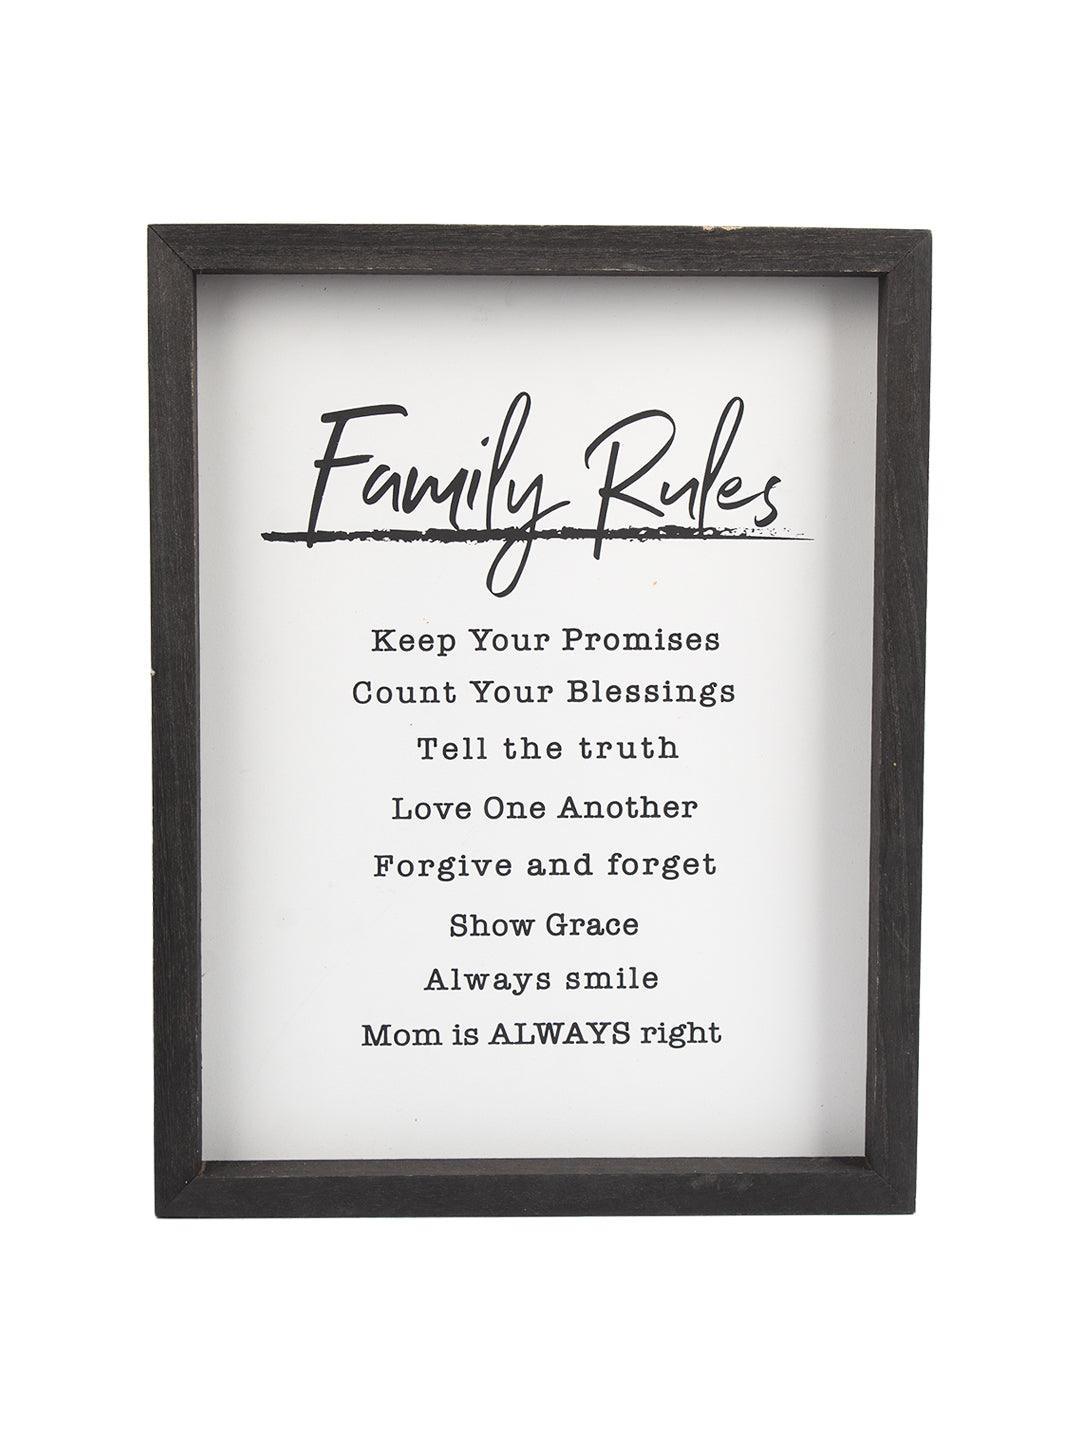 Decorative Wall Plaques - family rules - MARKET 99